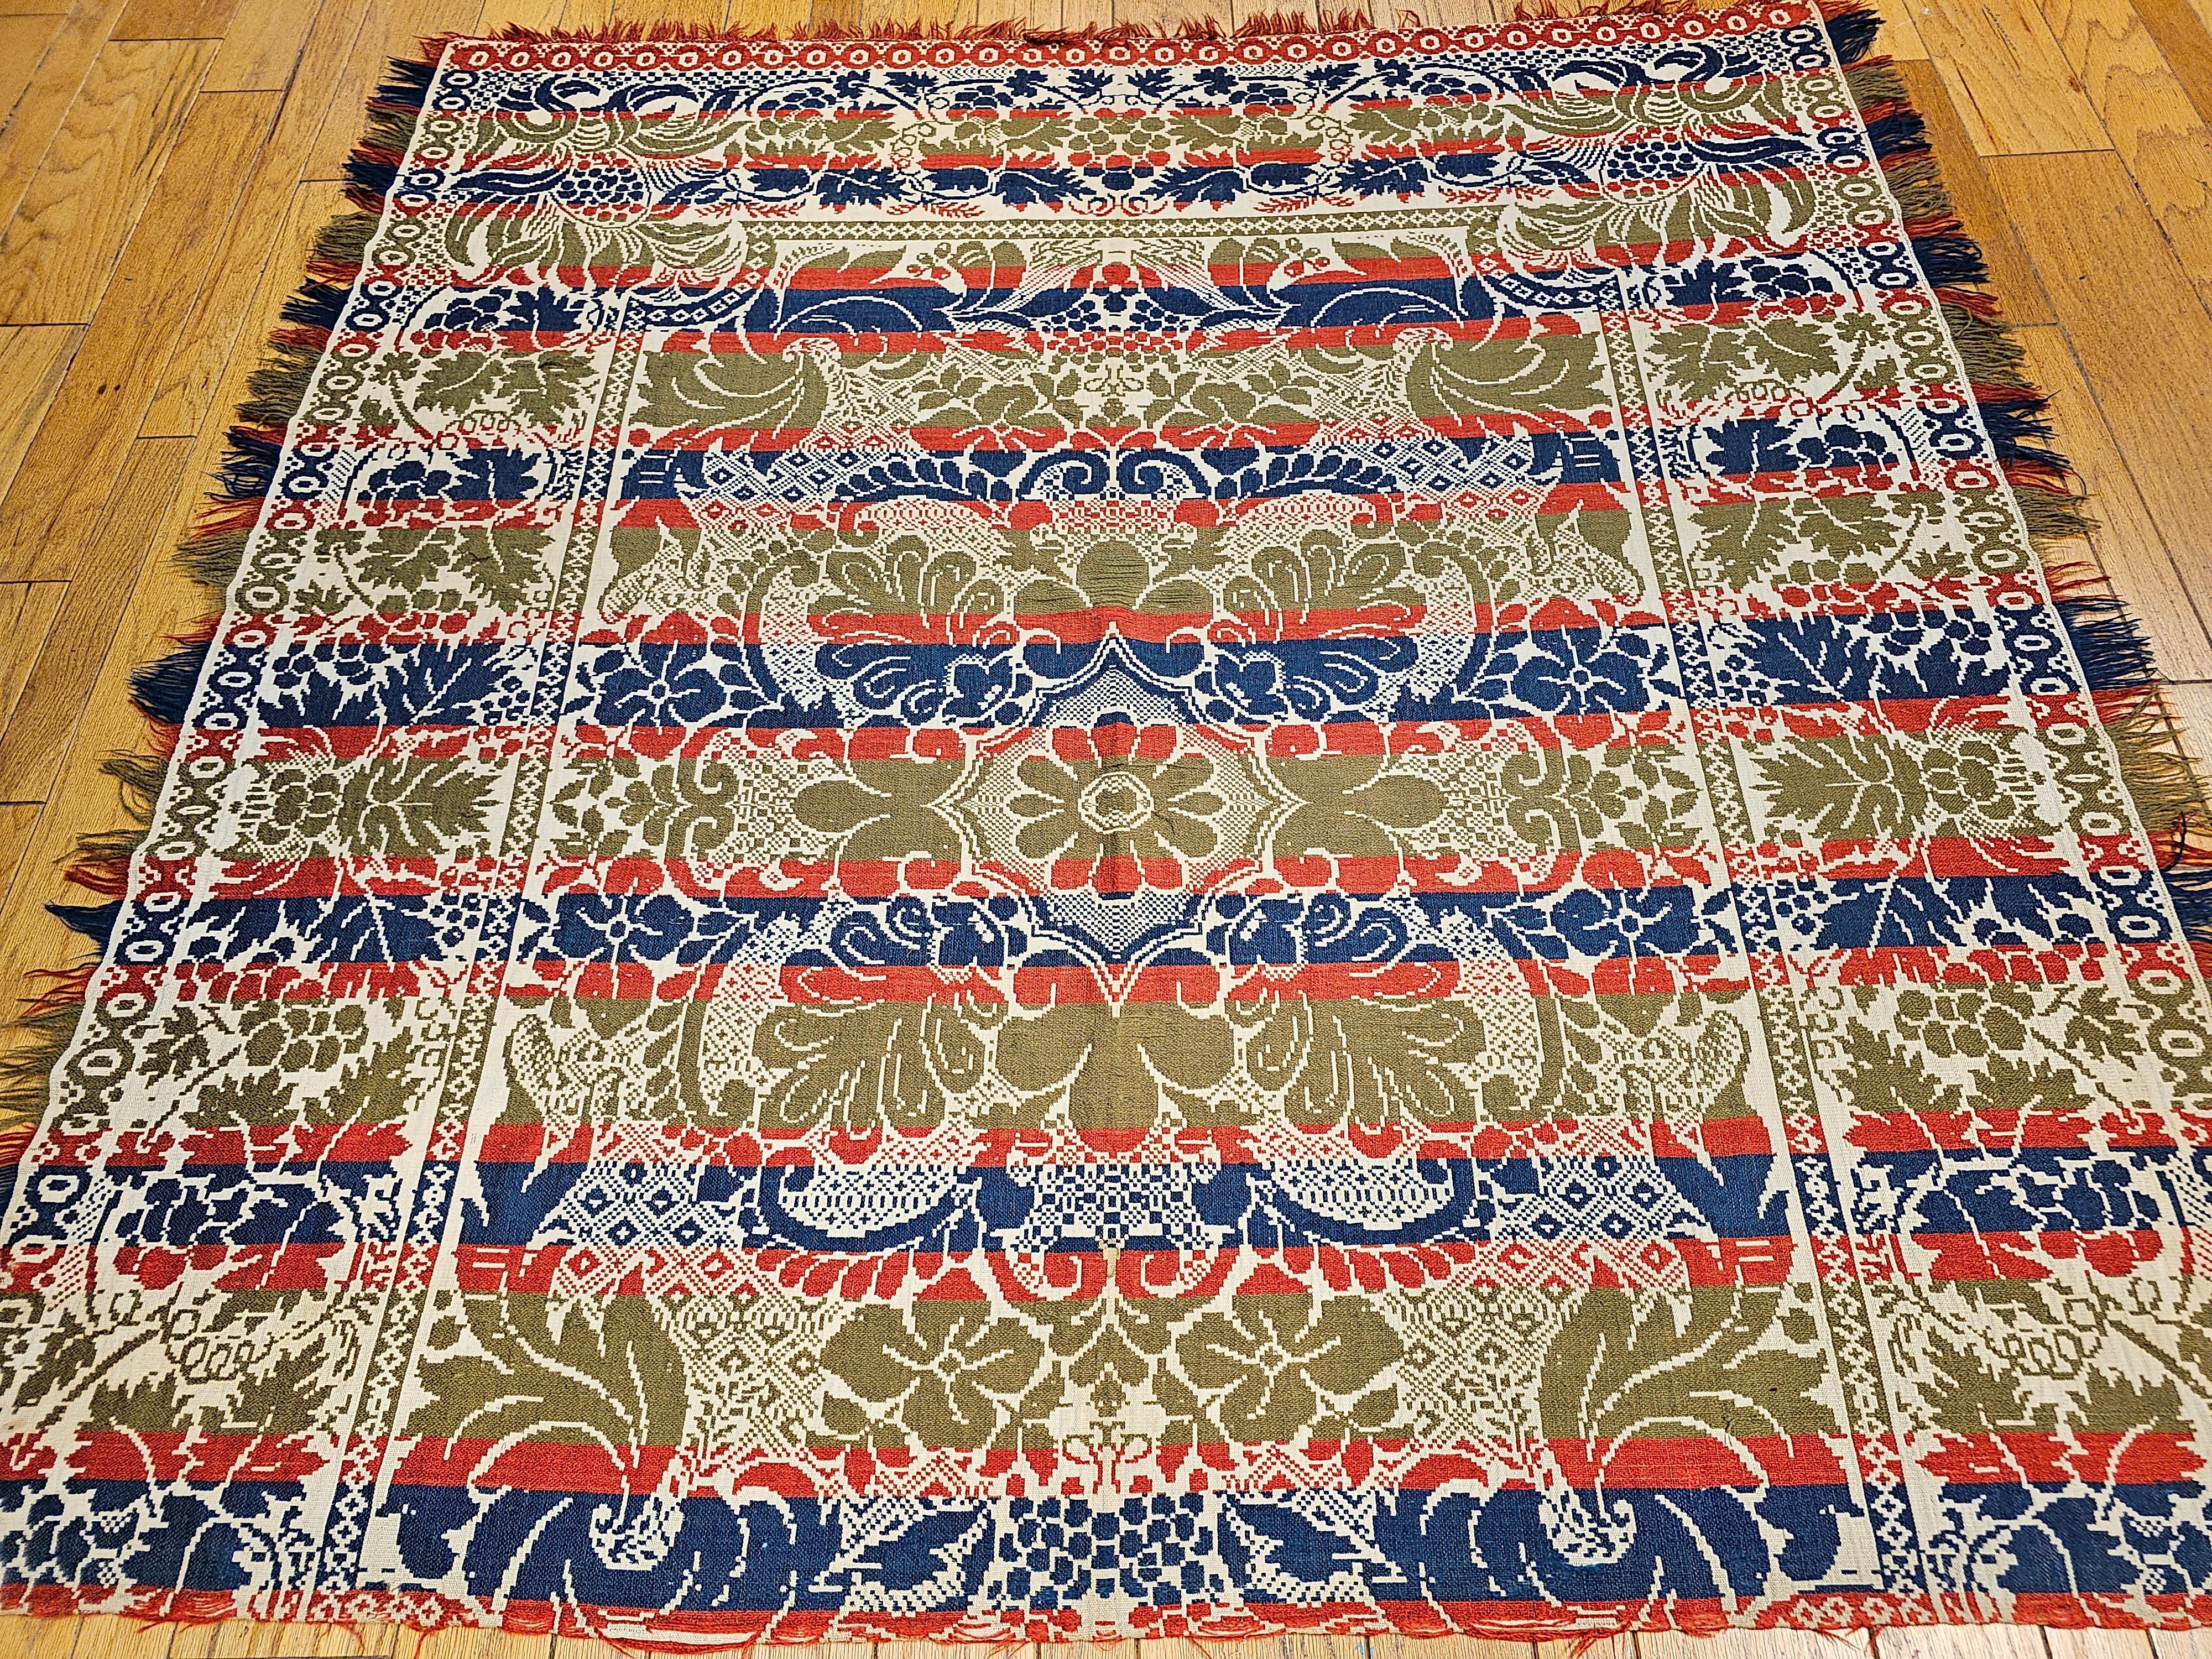 19th Century American Hand-Woven Four Color Coverlet in Red, Navy, Green, Ivory For Sale 5